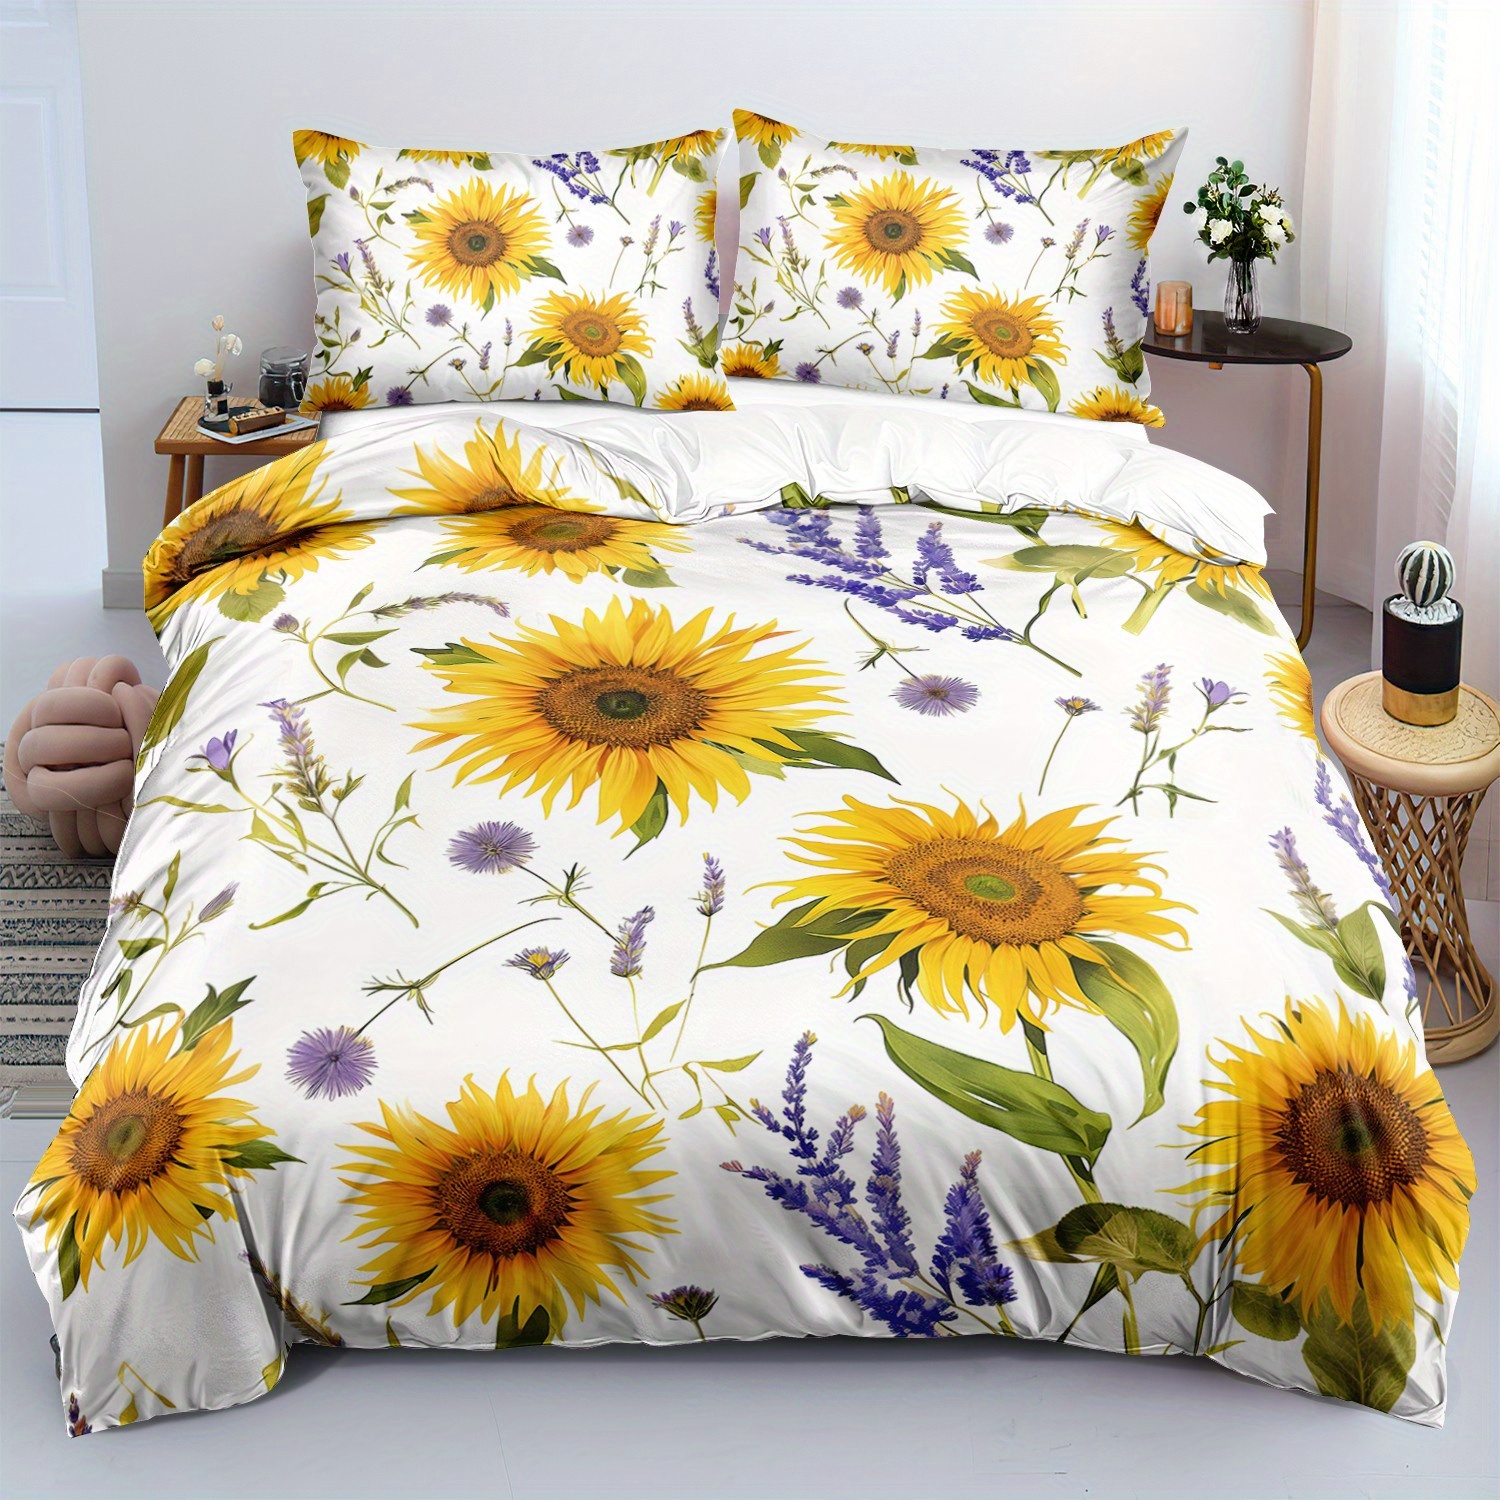 

Sunflower & Butterfly Themed Duvet Cover Set - 1 Or 2 Pillowcases Included, Breathable Polyester, All-season Comfort, Zip Closure - Perfect For Bedroom & Guest Room